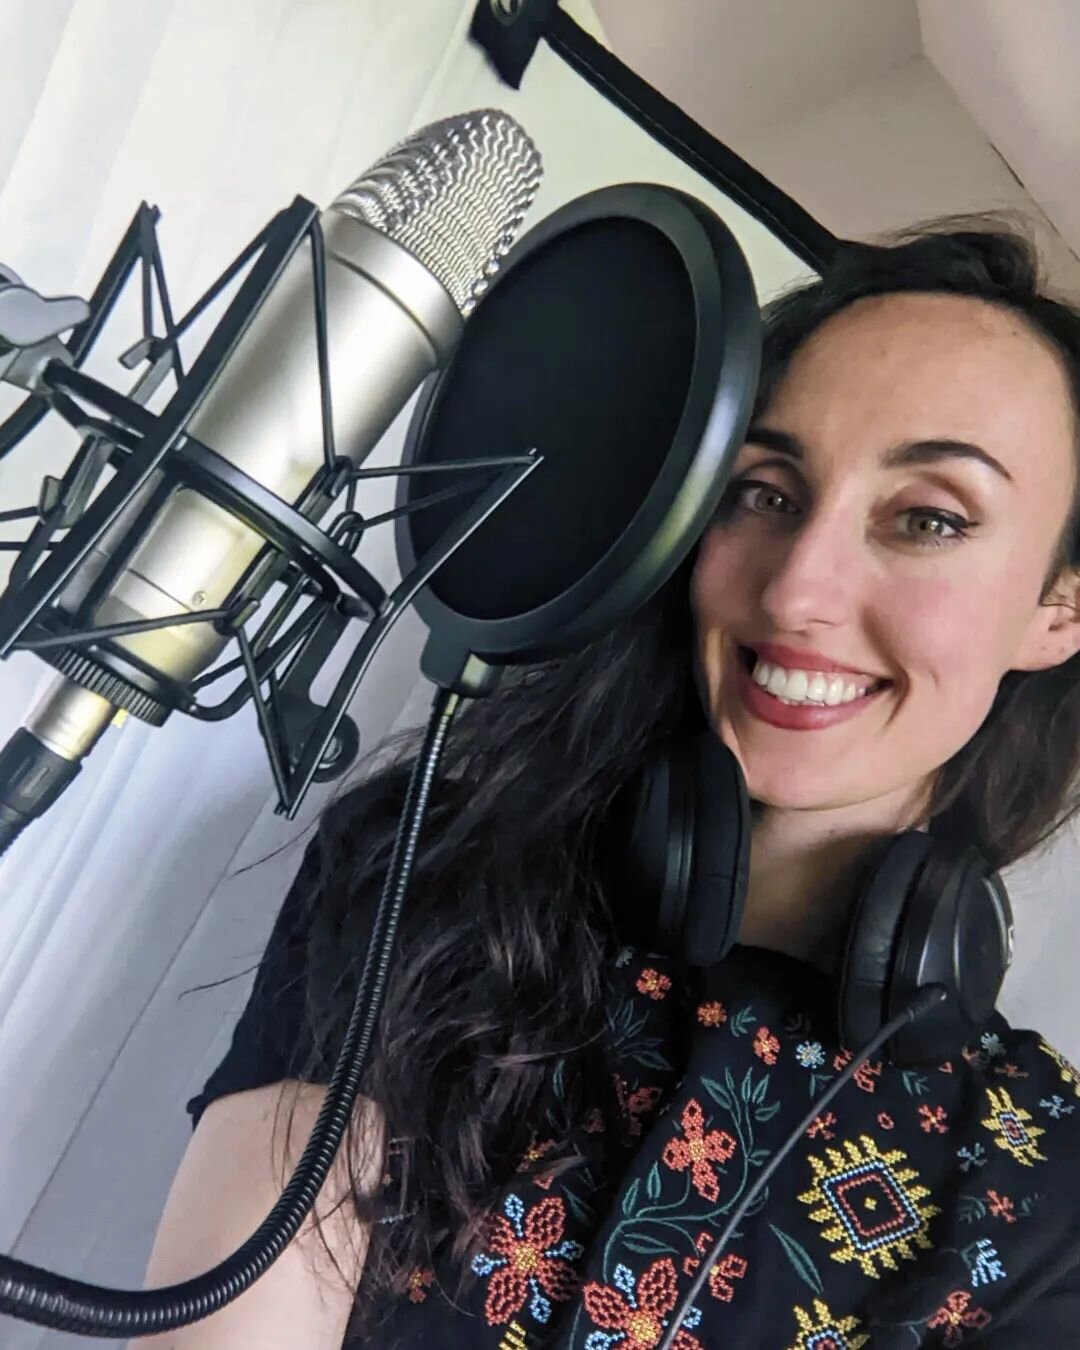 Busy day in the booth today. Working on two fantasy voiceovers, one in Welsh ❤️ And then onto some ambient vocals for a beautiful soundtrack 🎙️🙌
.
.
.
.
.
.
.
.
.
#vocals #vocalists #composer #voiceover #fantasy #remoterecording #homestudio #soundt